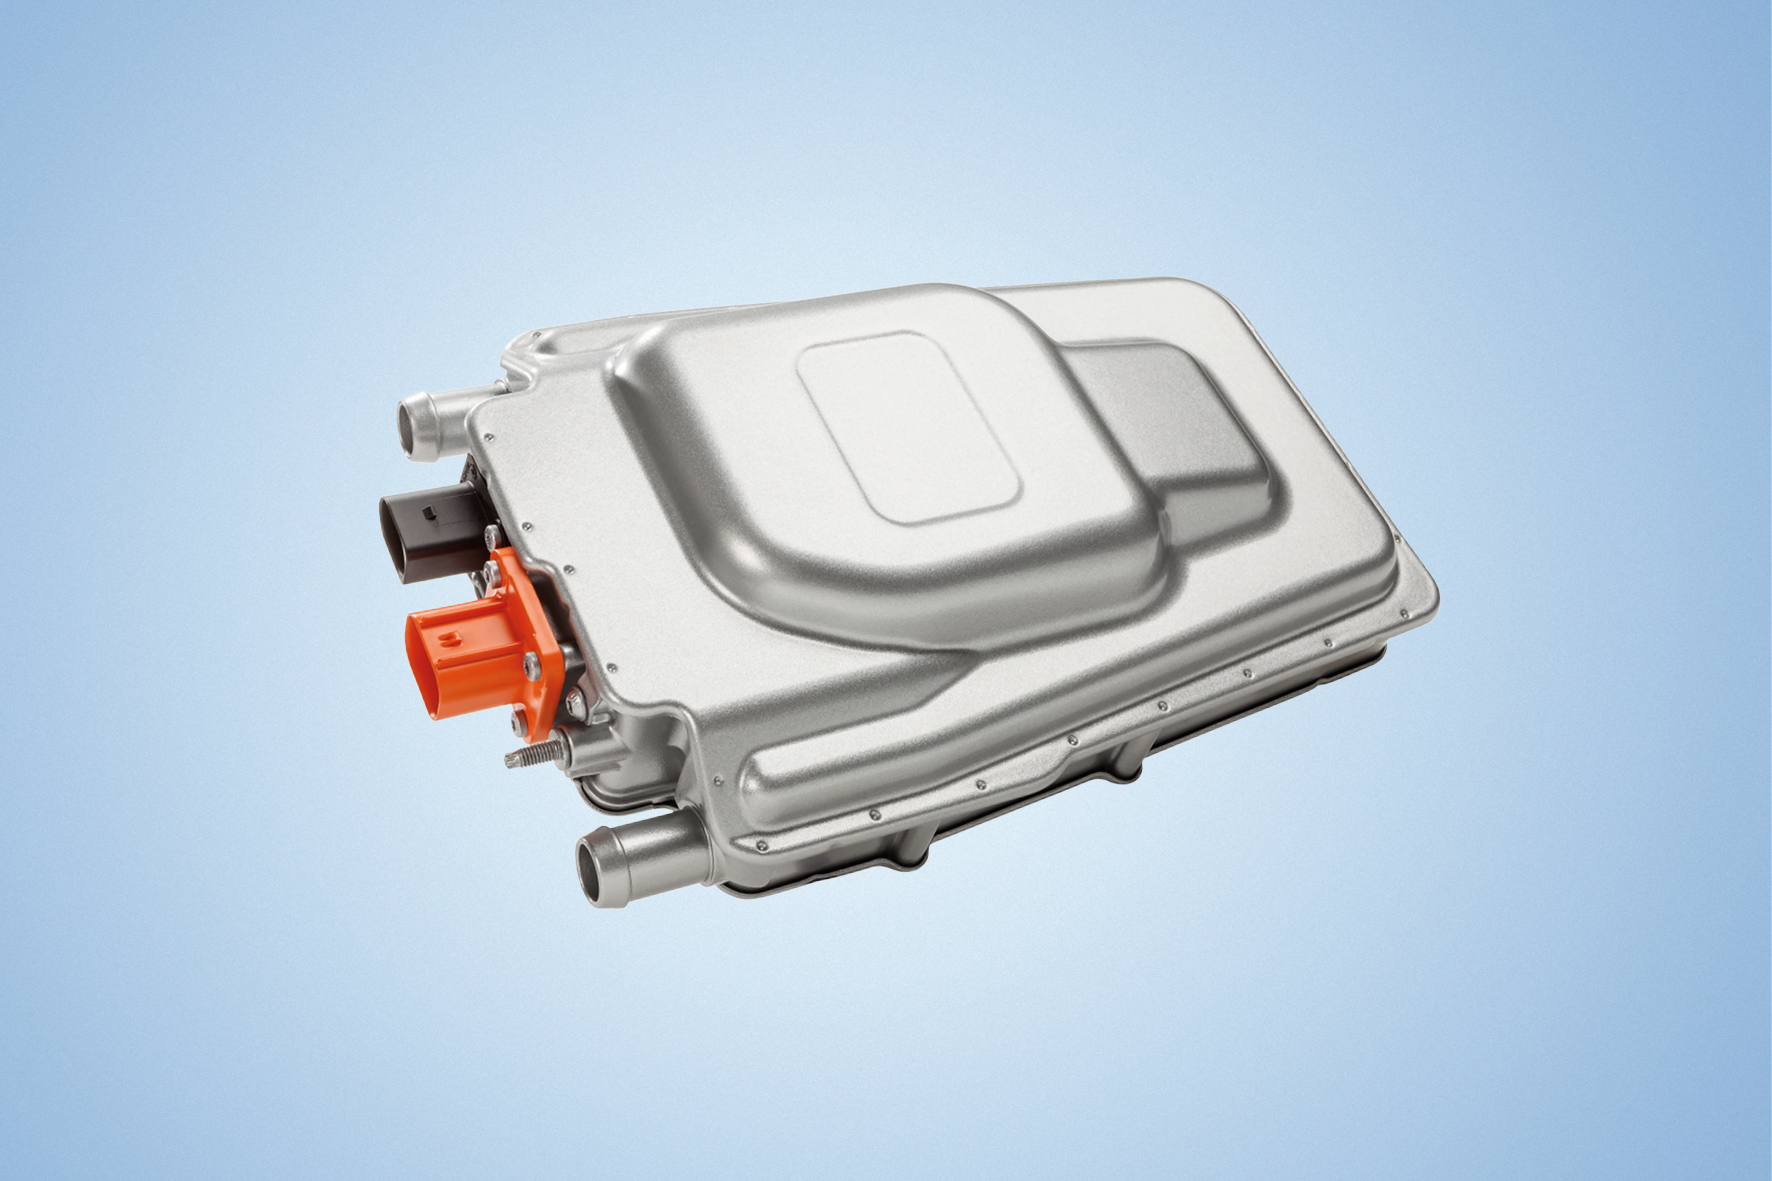 Webasto first entered the electric vehicle market in 2014 with the high voltage heater.